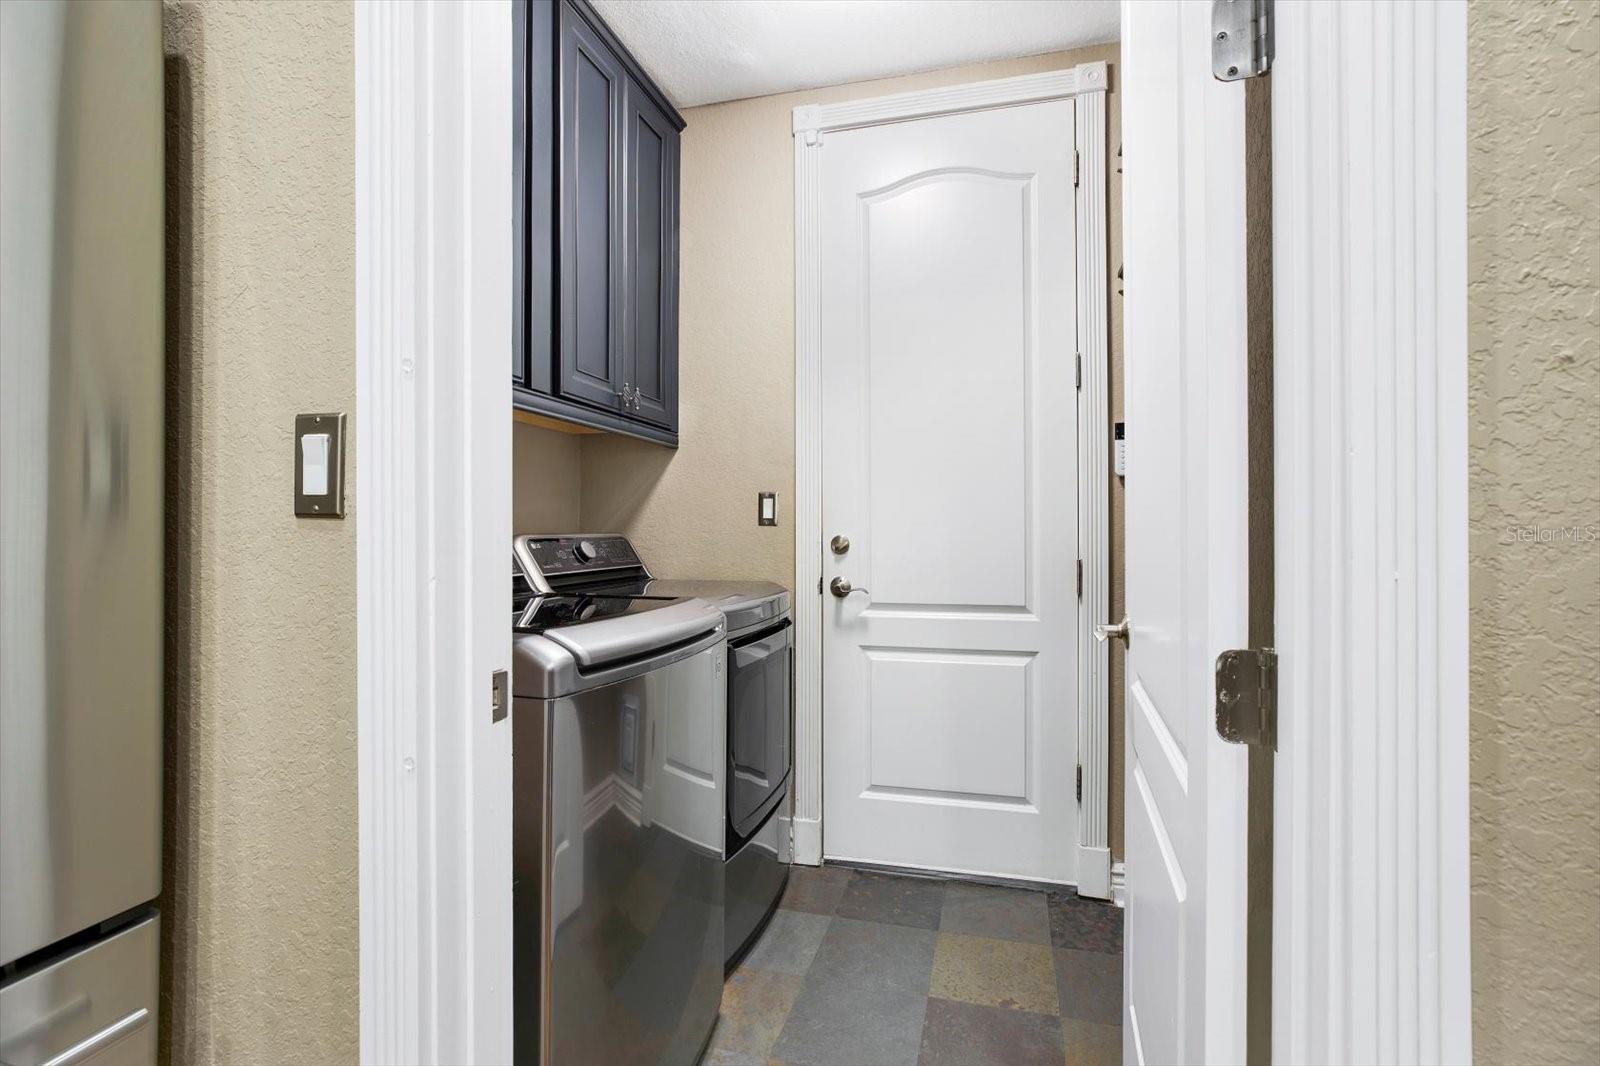 Laundry Room off the Kitchen and Door to Garage